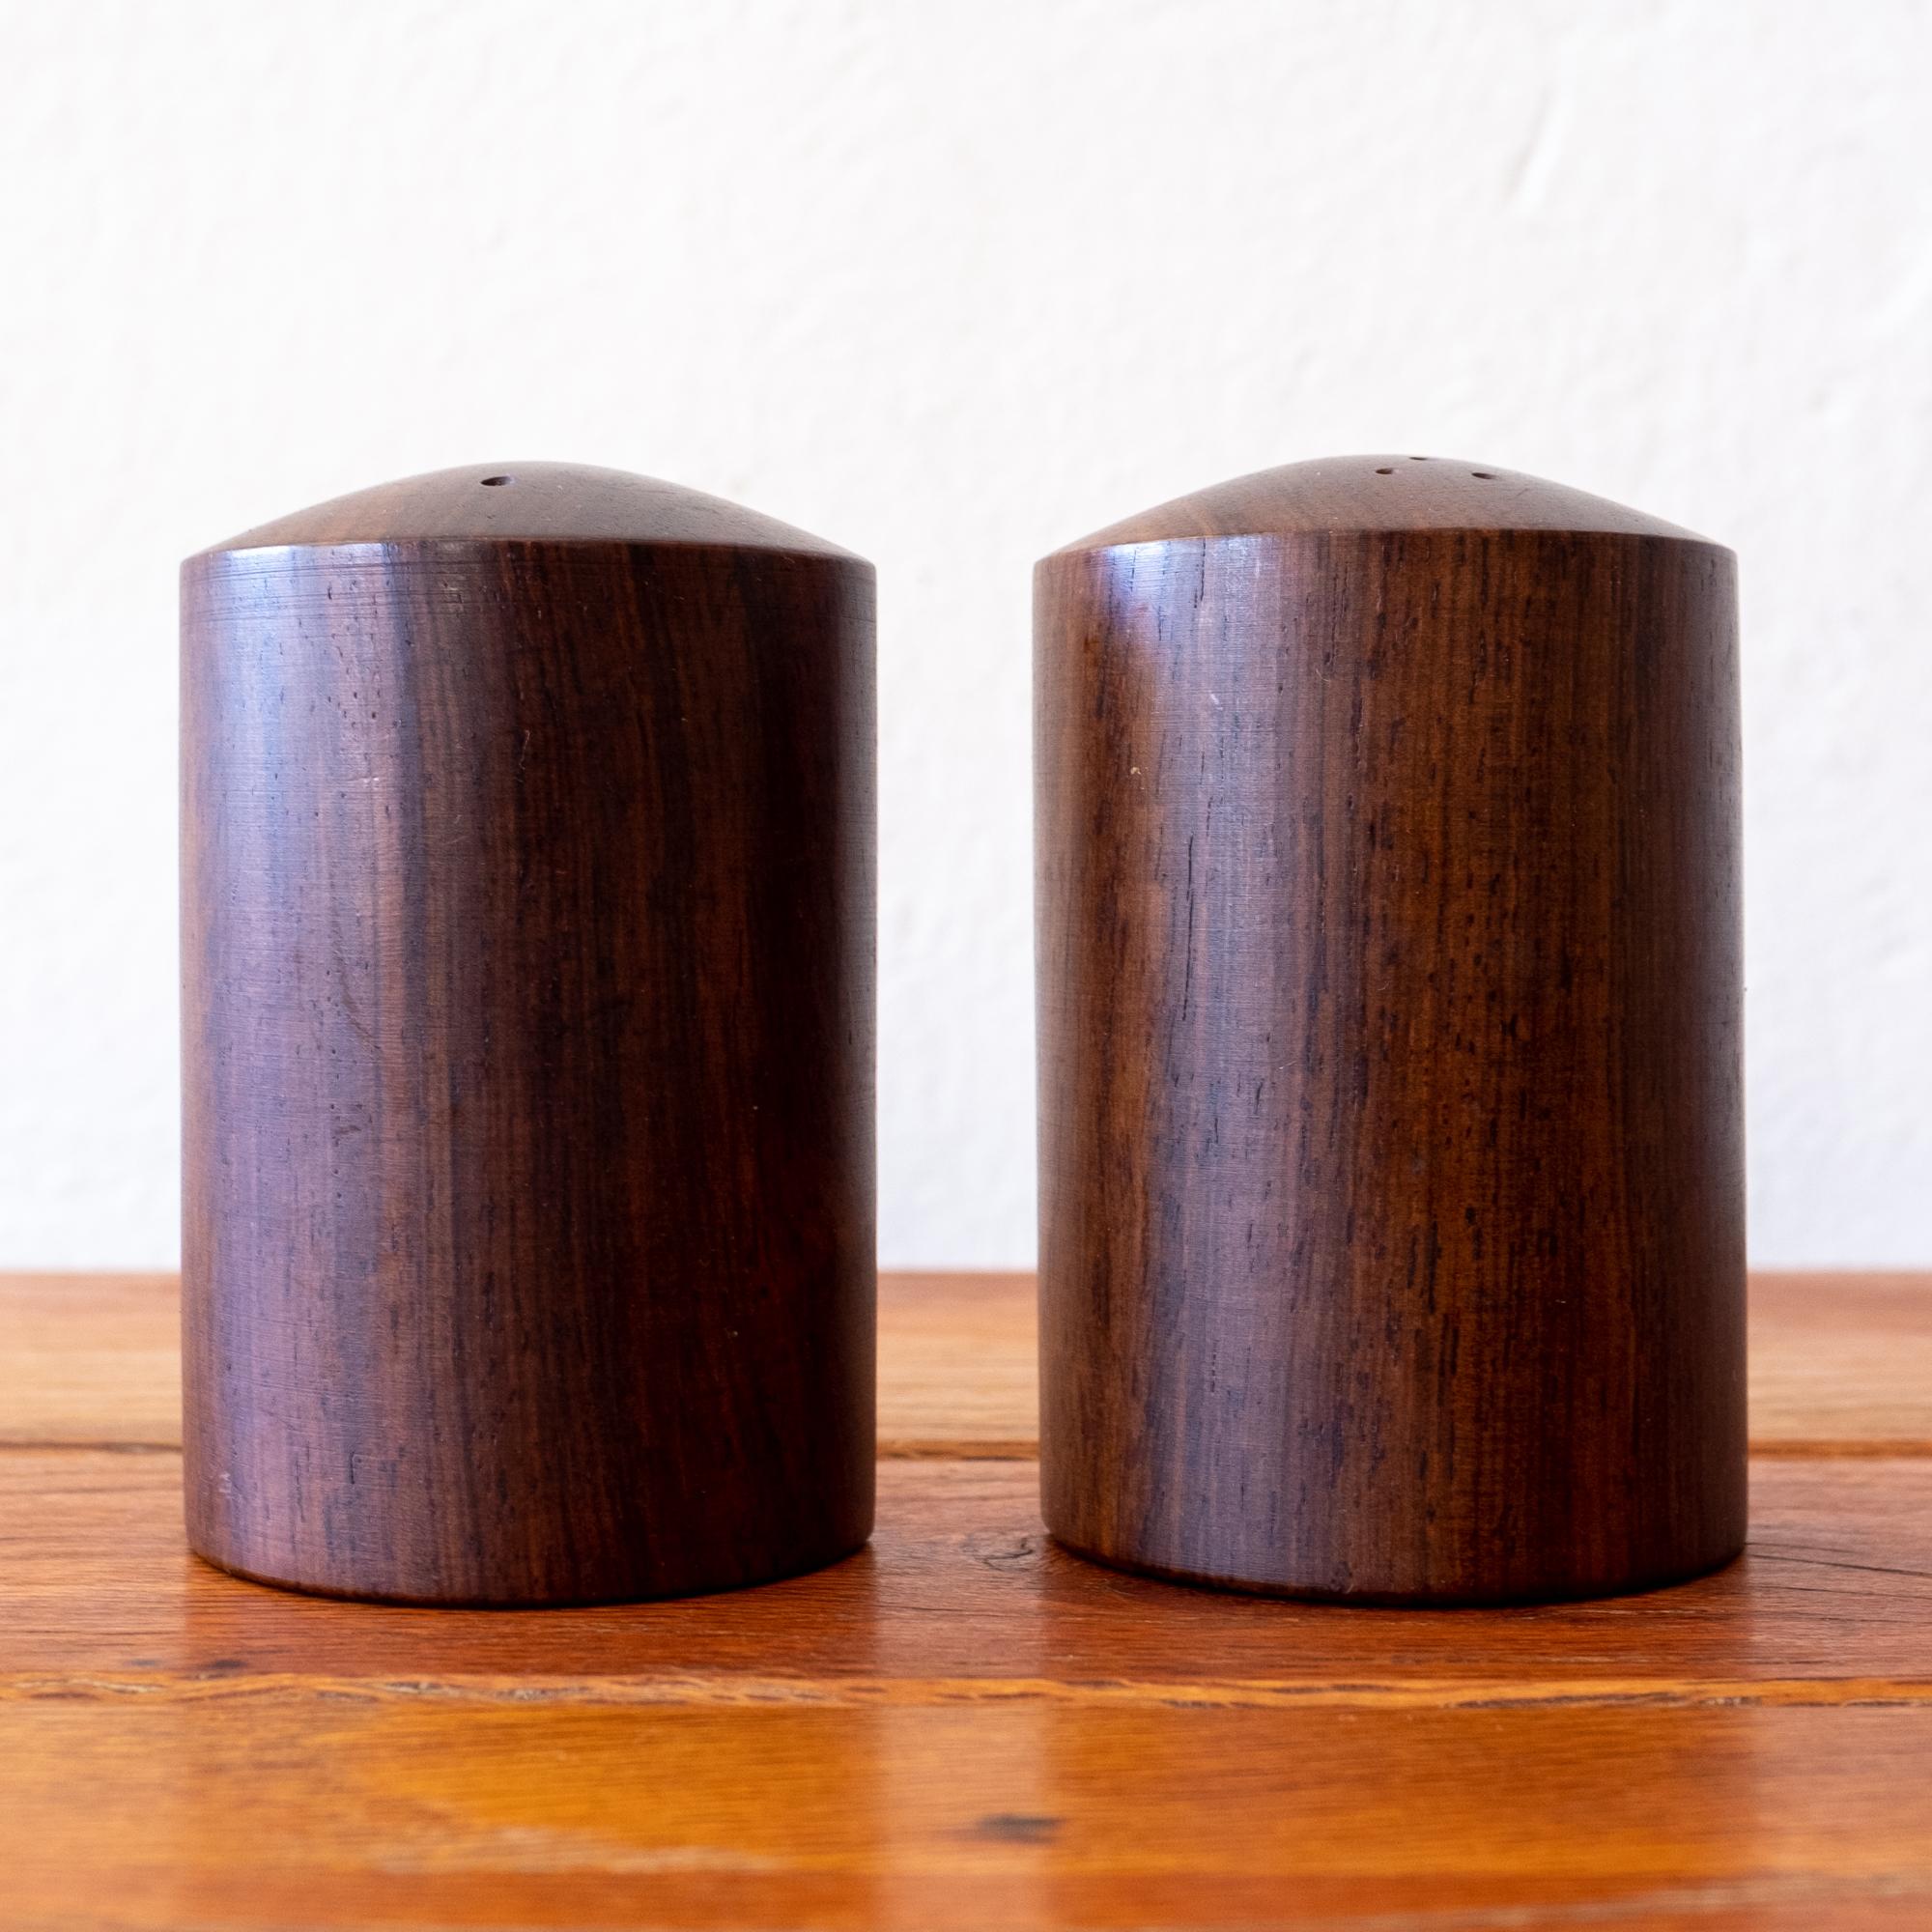 Danish Solid Rosewood Salt and Pepper Shakers, 1950s For Sale